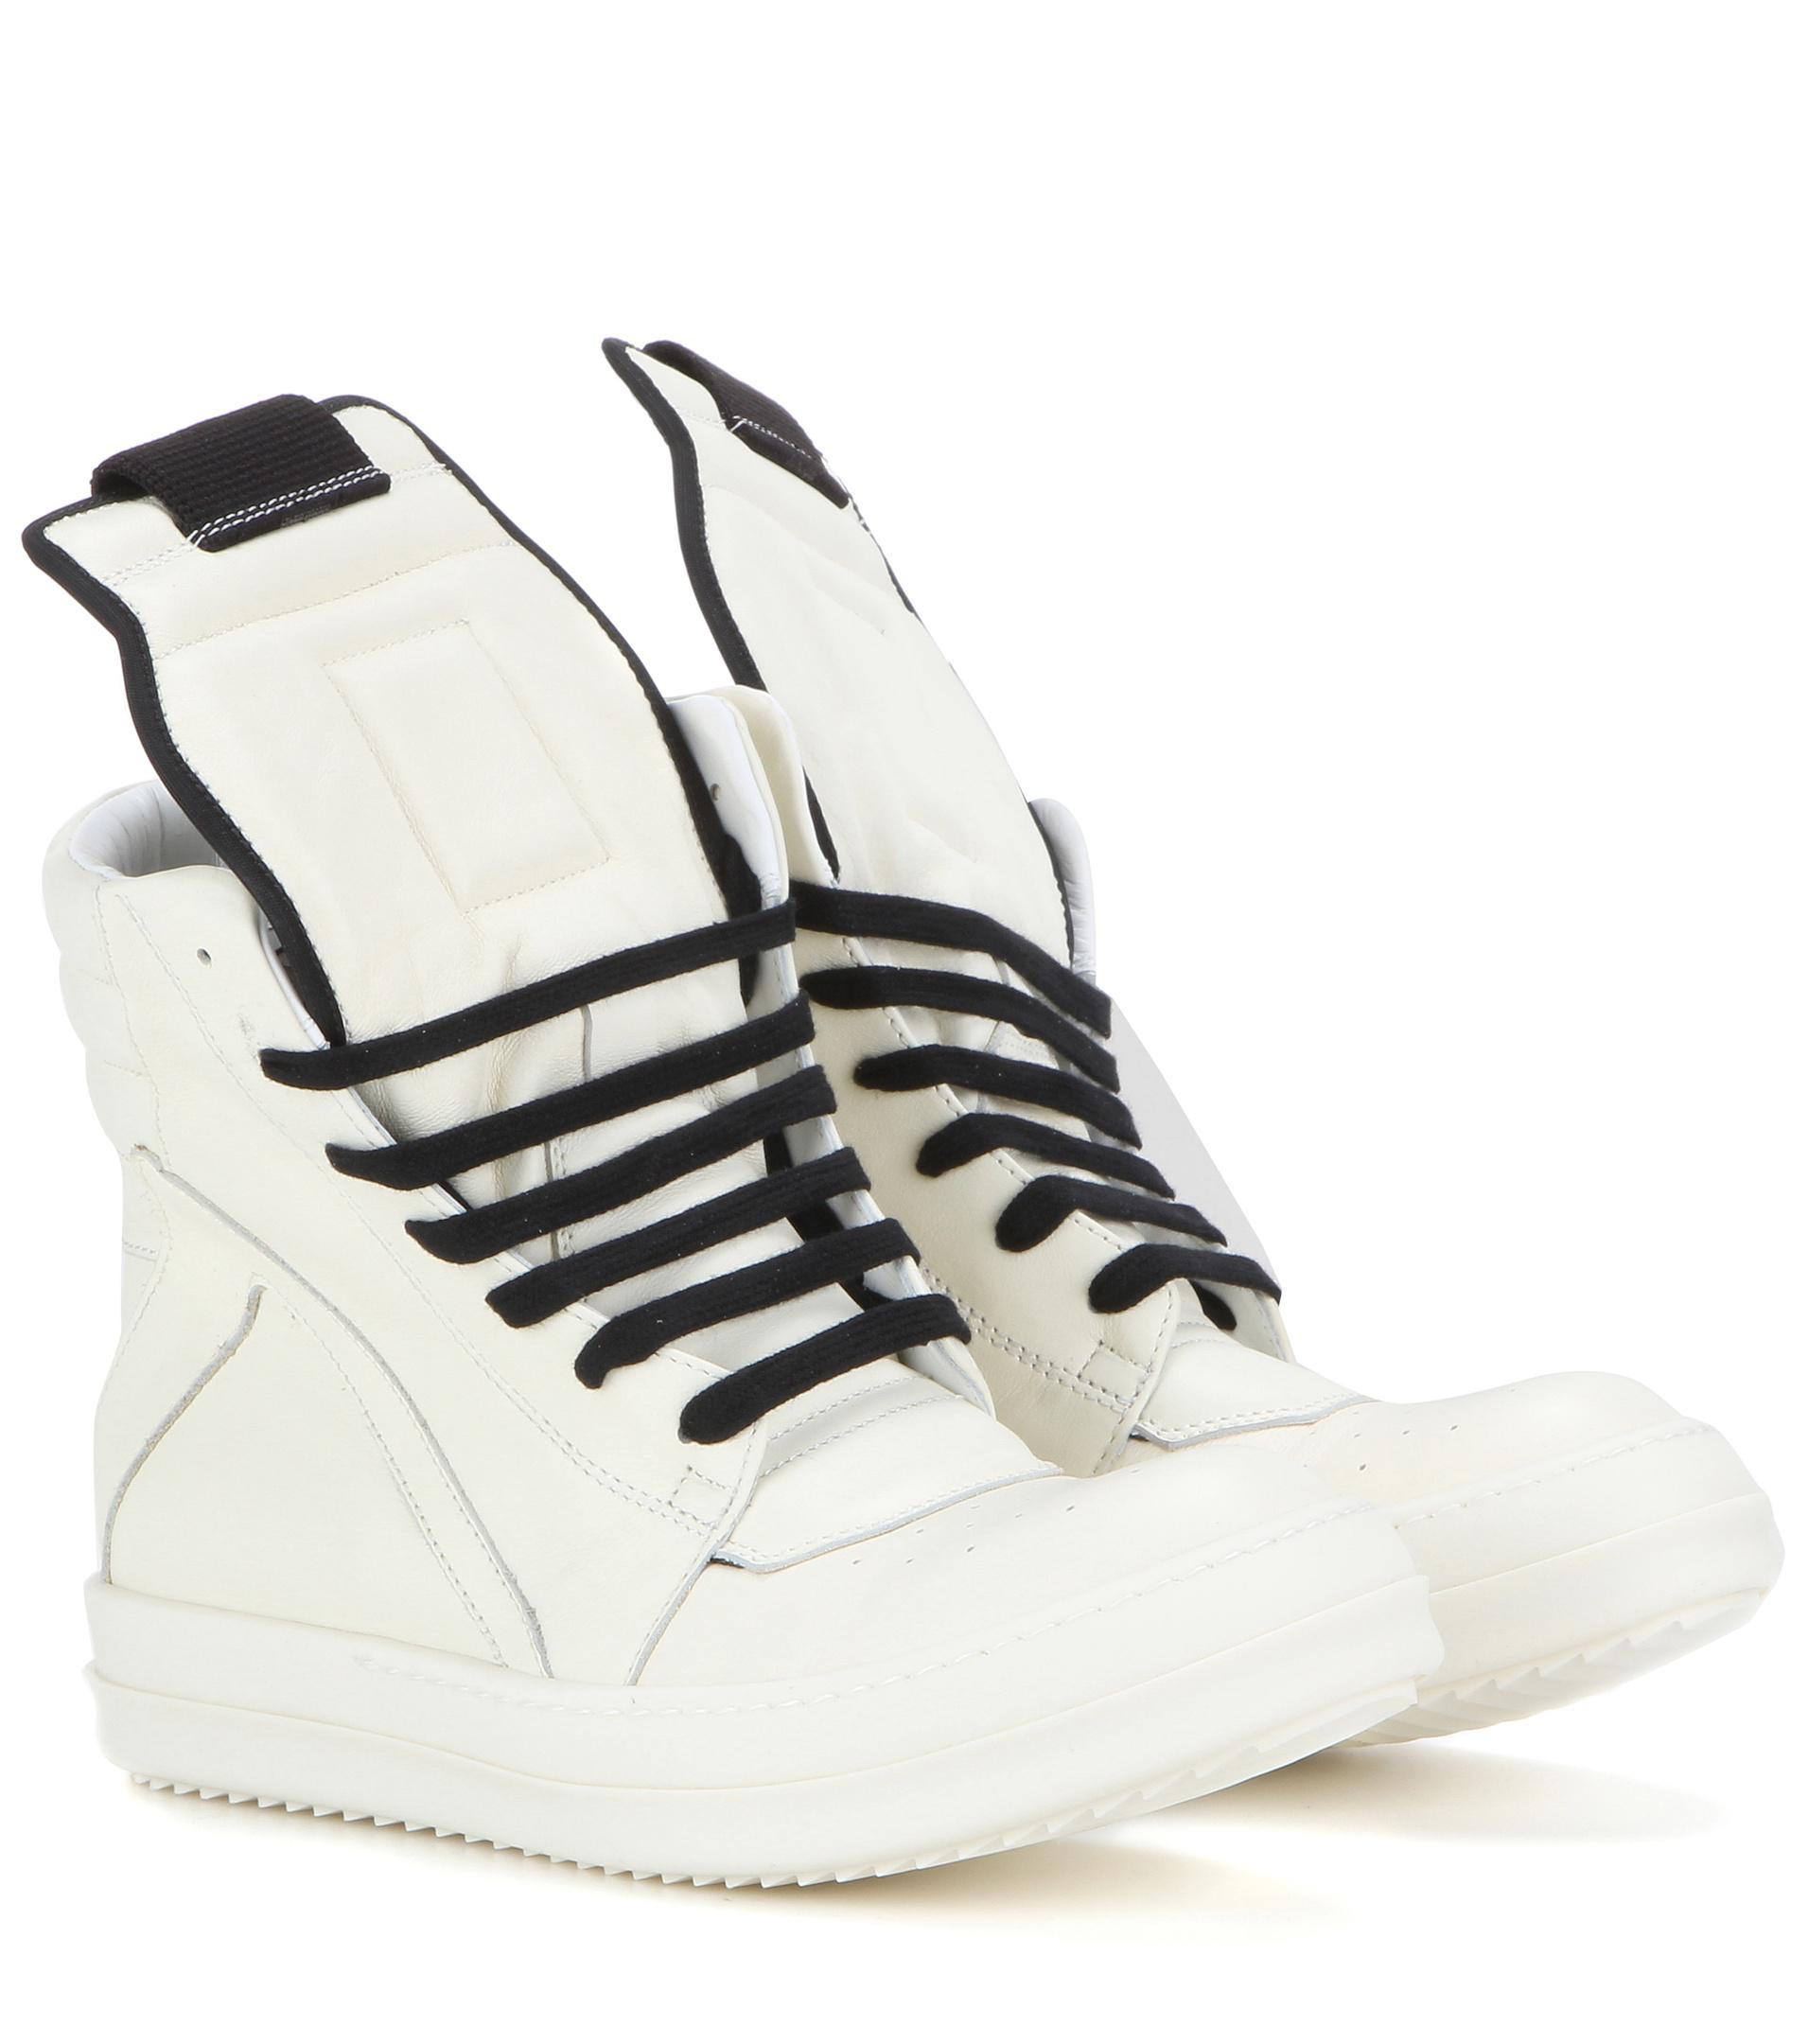 Lyst - Rick Owens Geobasket Leather High-top Sneakers in White - Save 30%